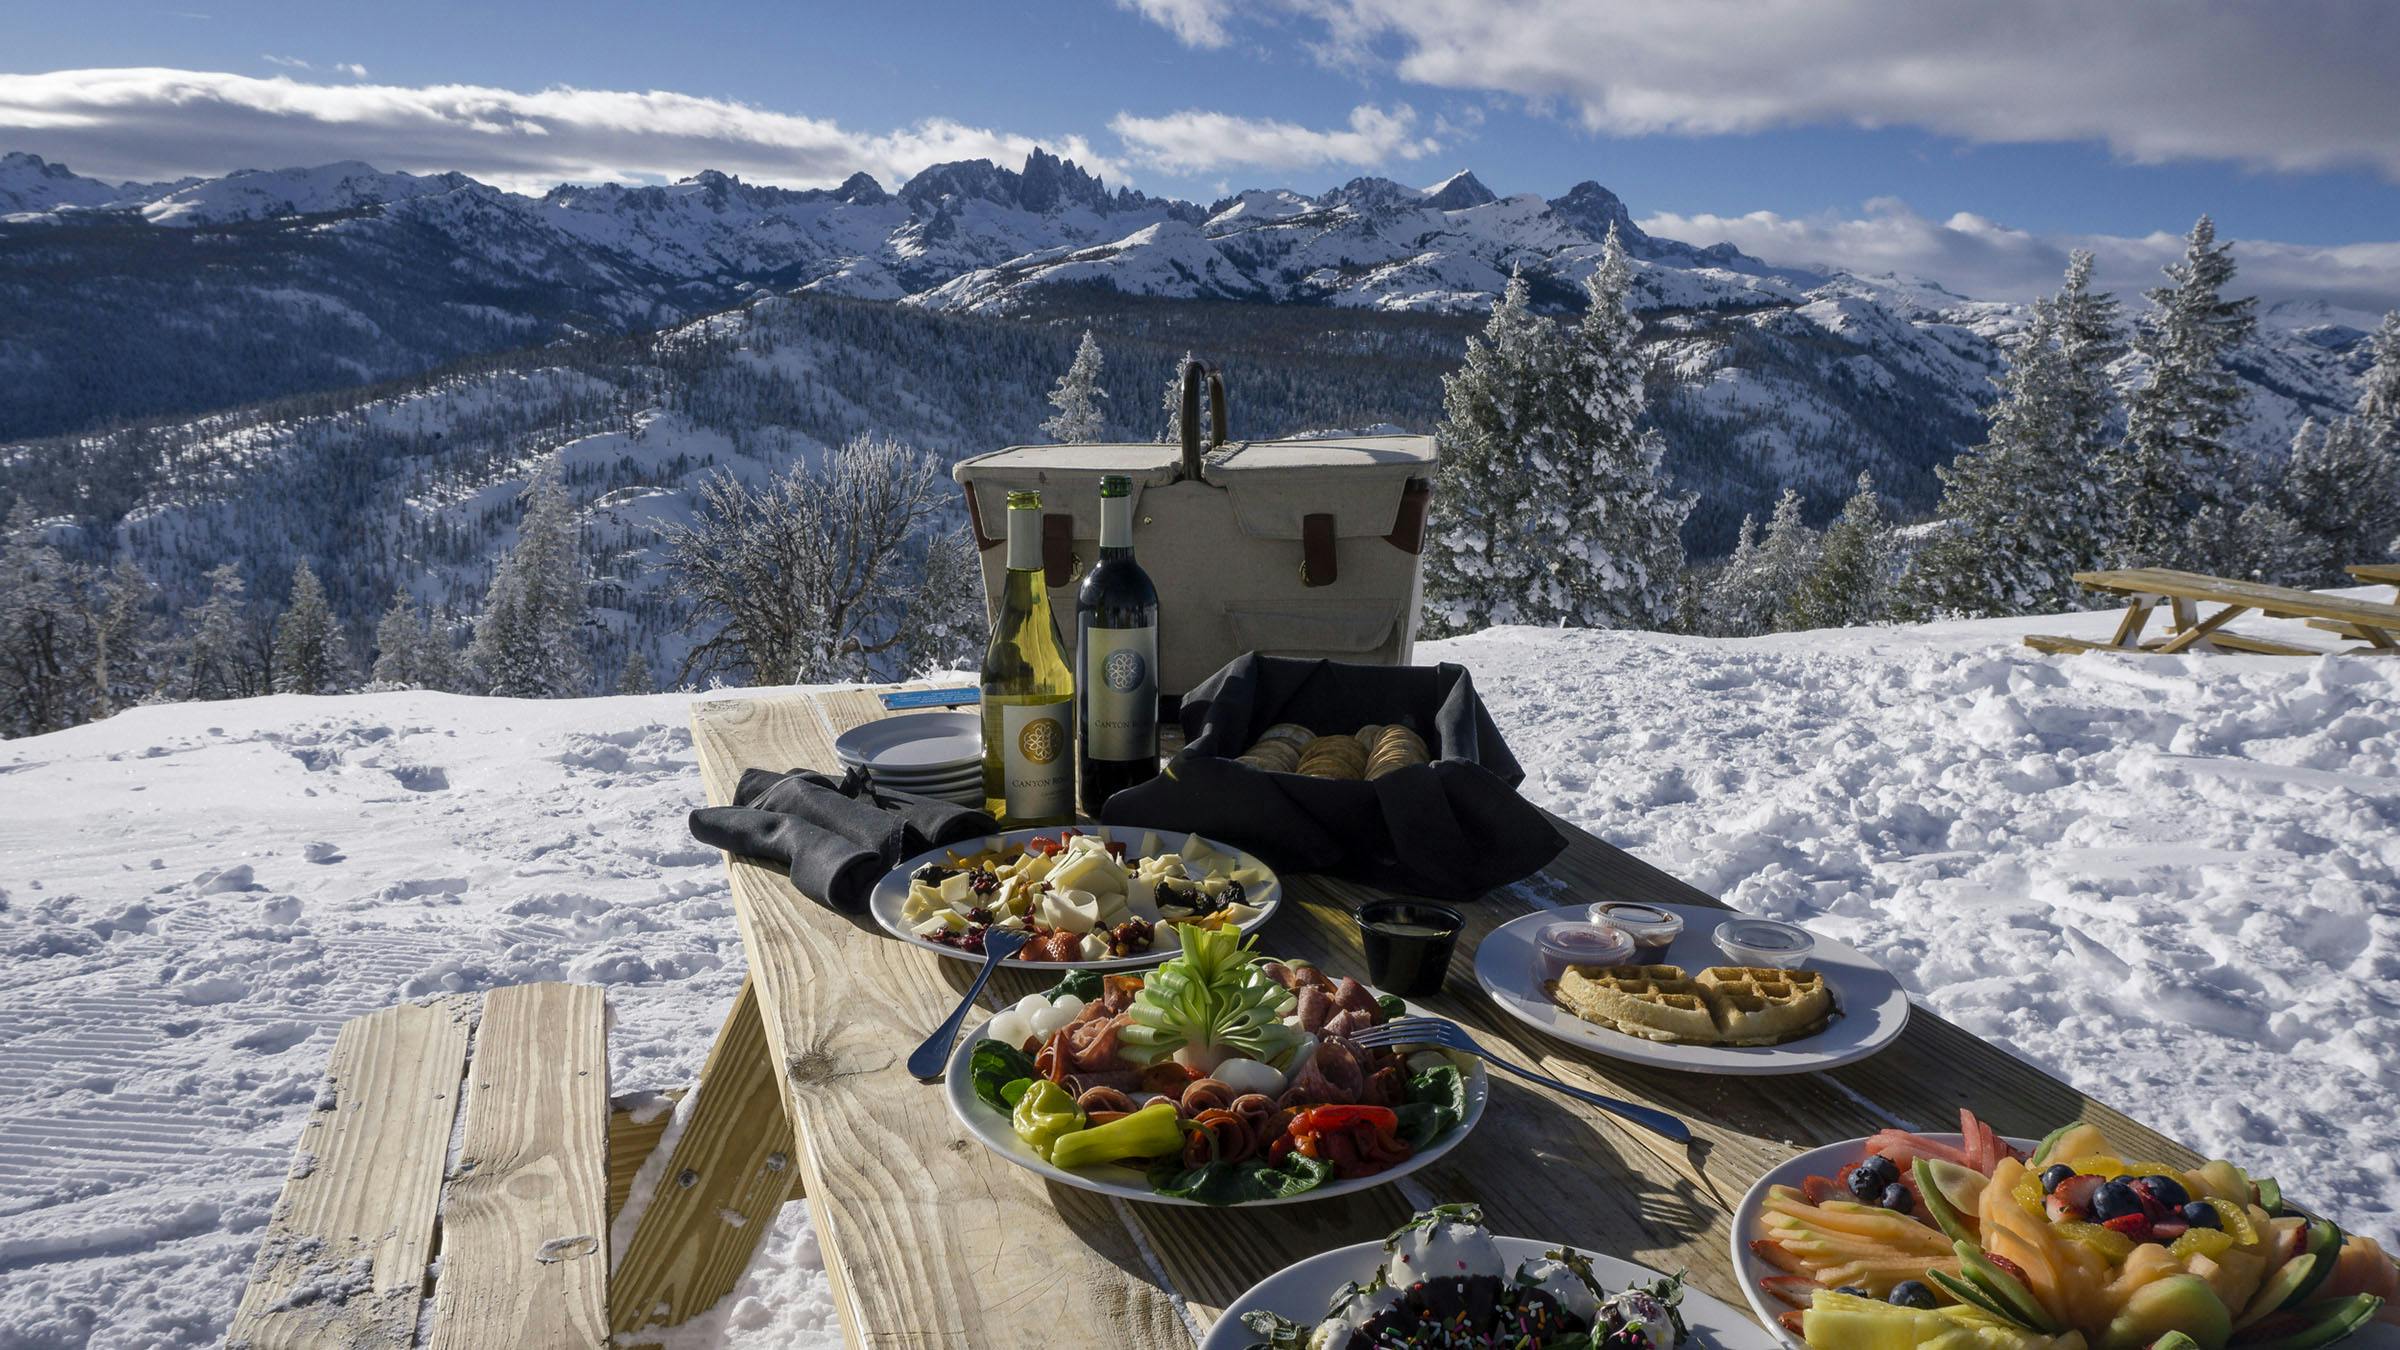 Charcuterie spread on a picnic table at scenic Minaret Vista with snowy mountains in the background